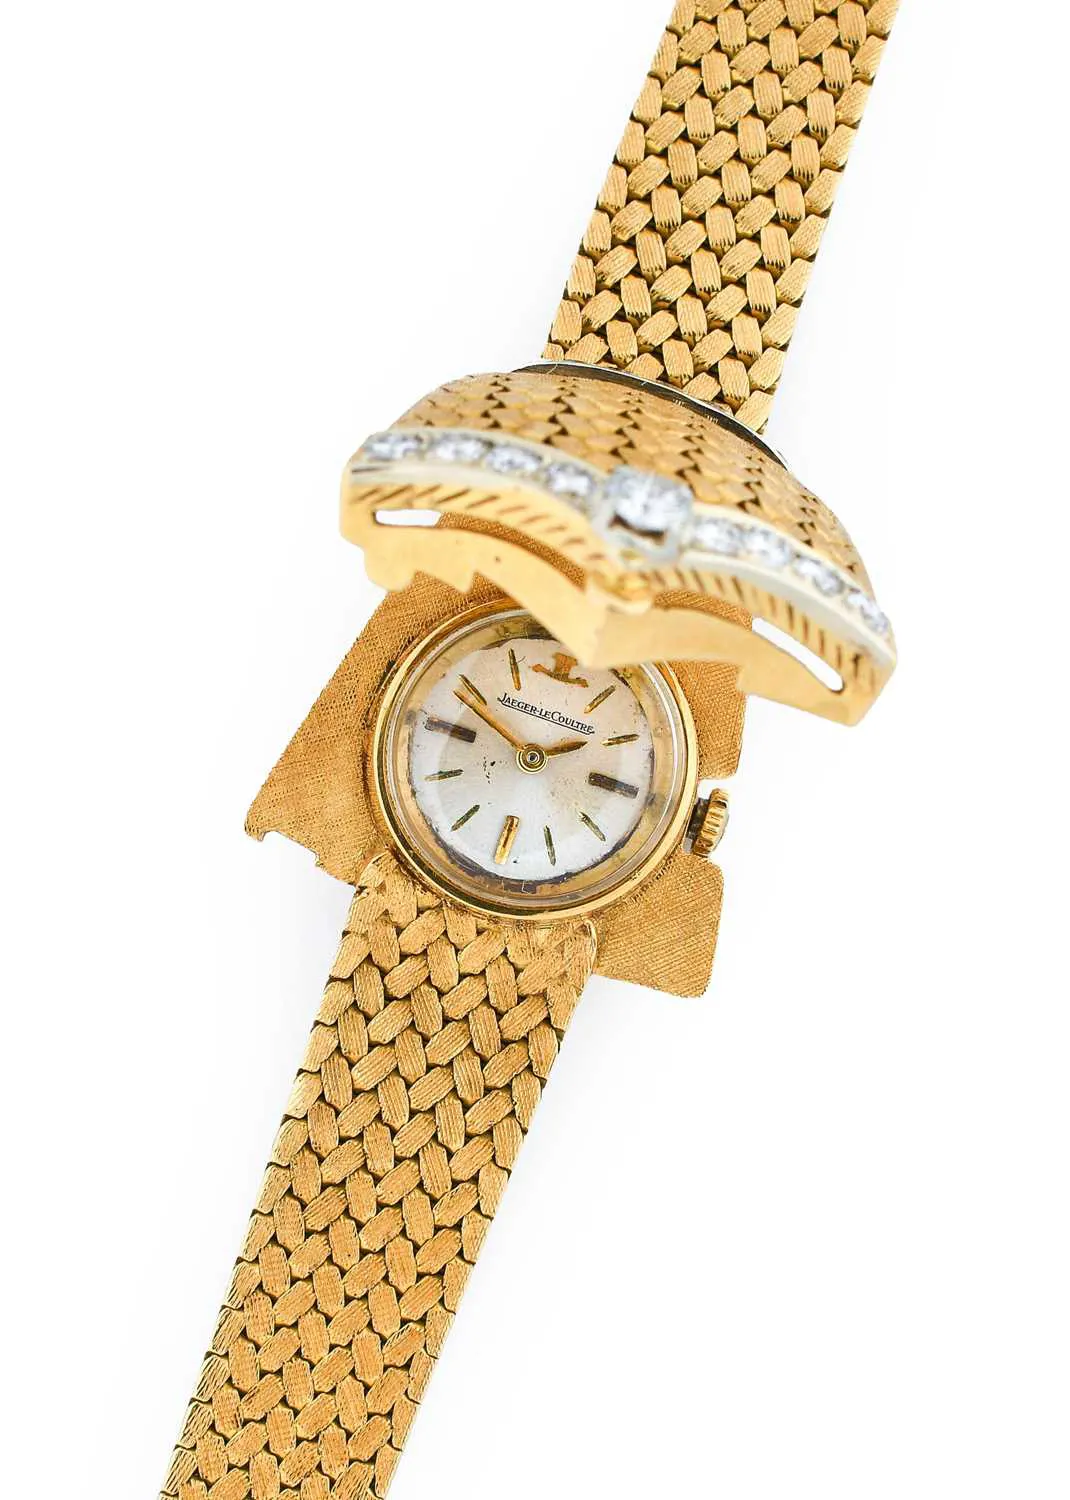 Jaeger-LeCoultre 26mm Yellow gold and diamond-set Silver